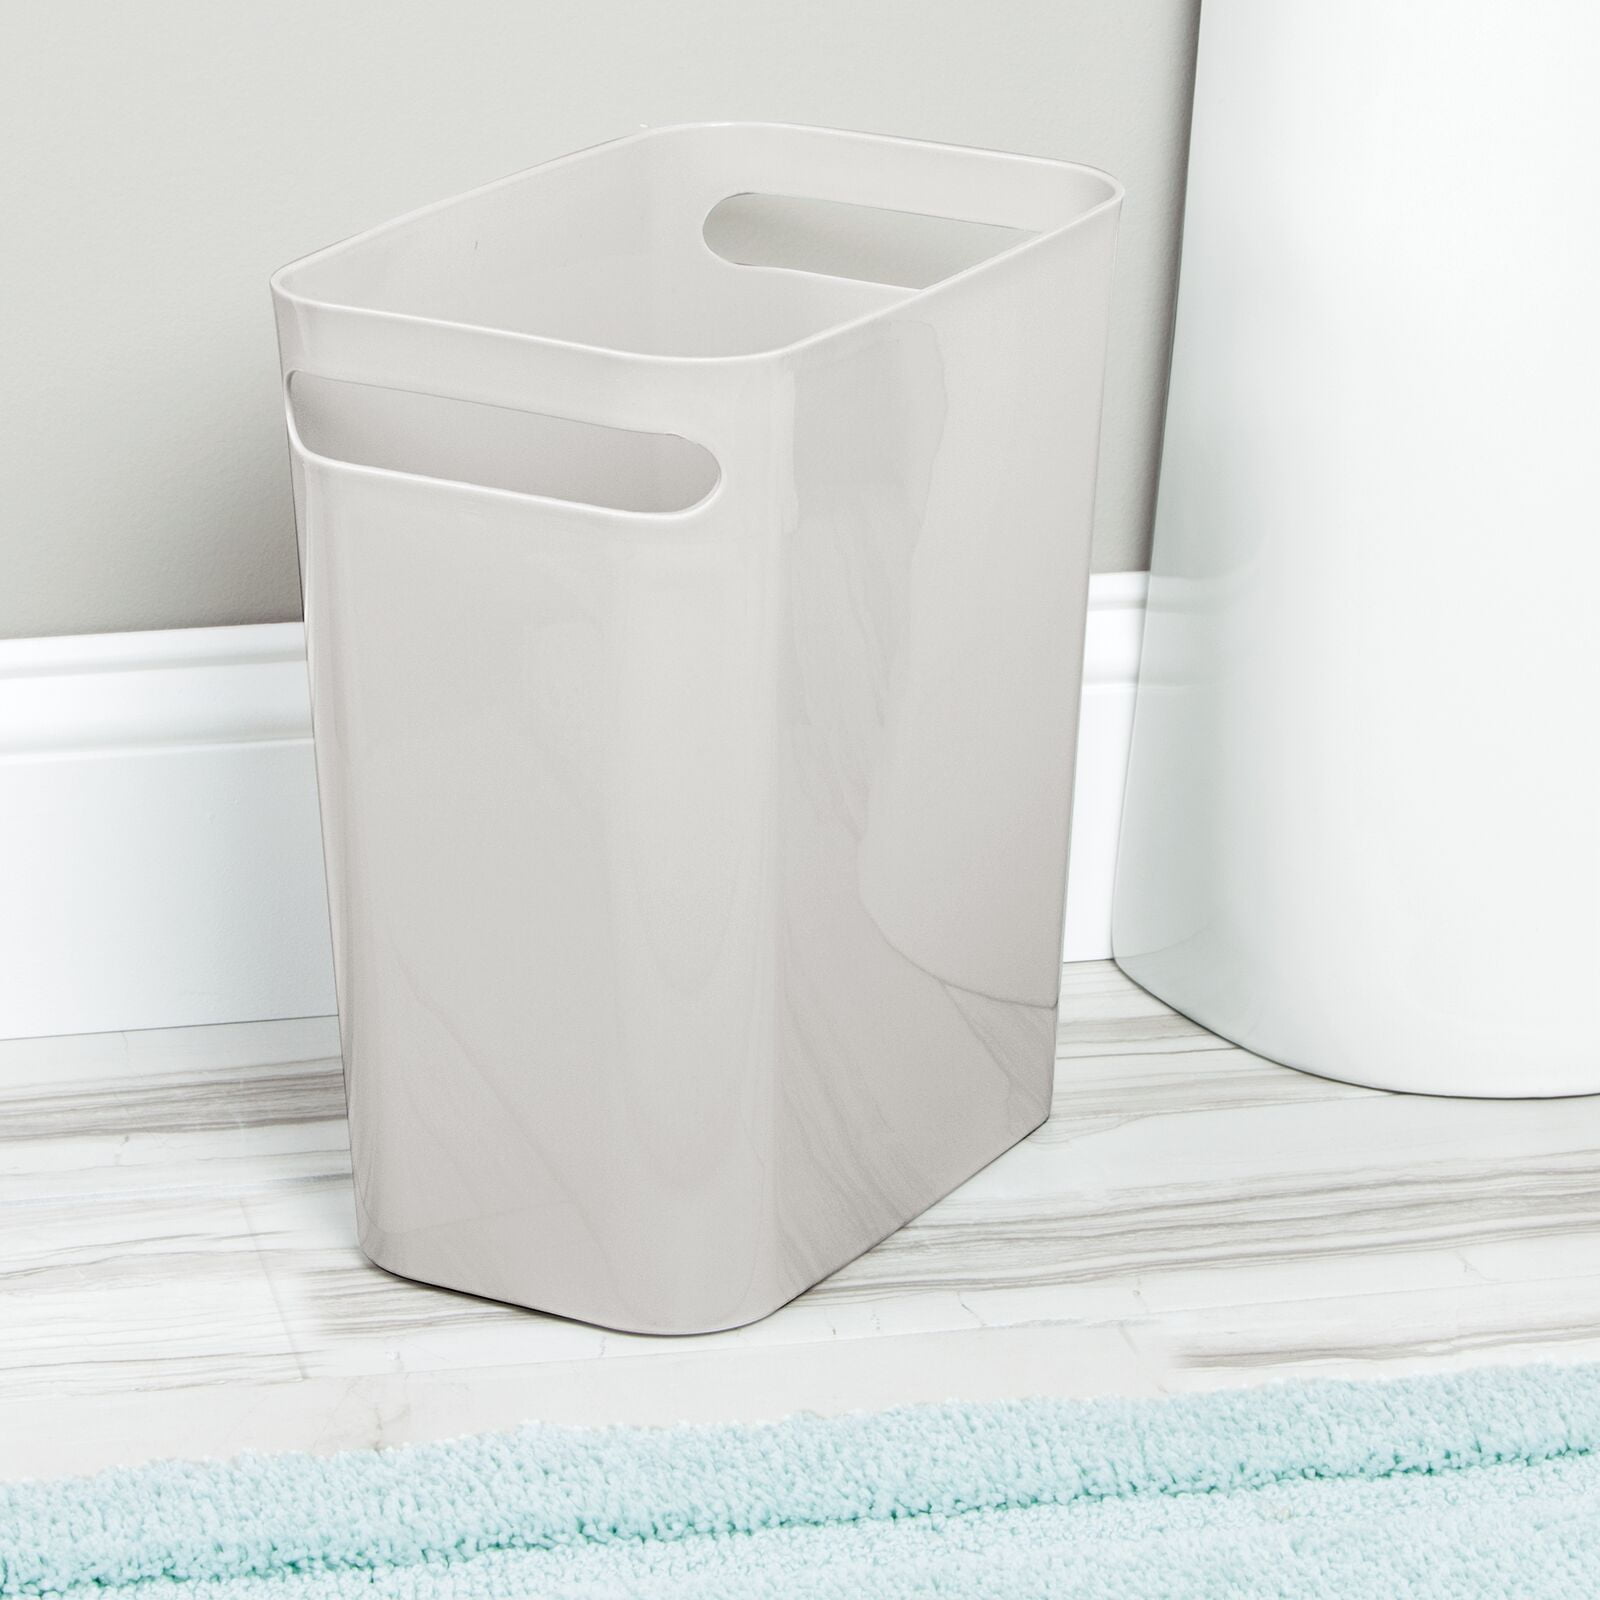 ColorLife 2.4 Gallons Plastic Manual Lift Trash Can